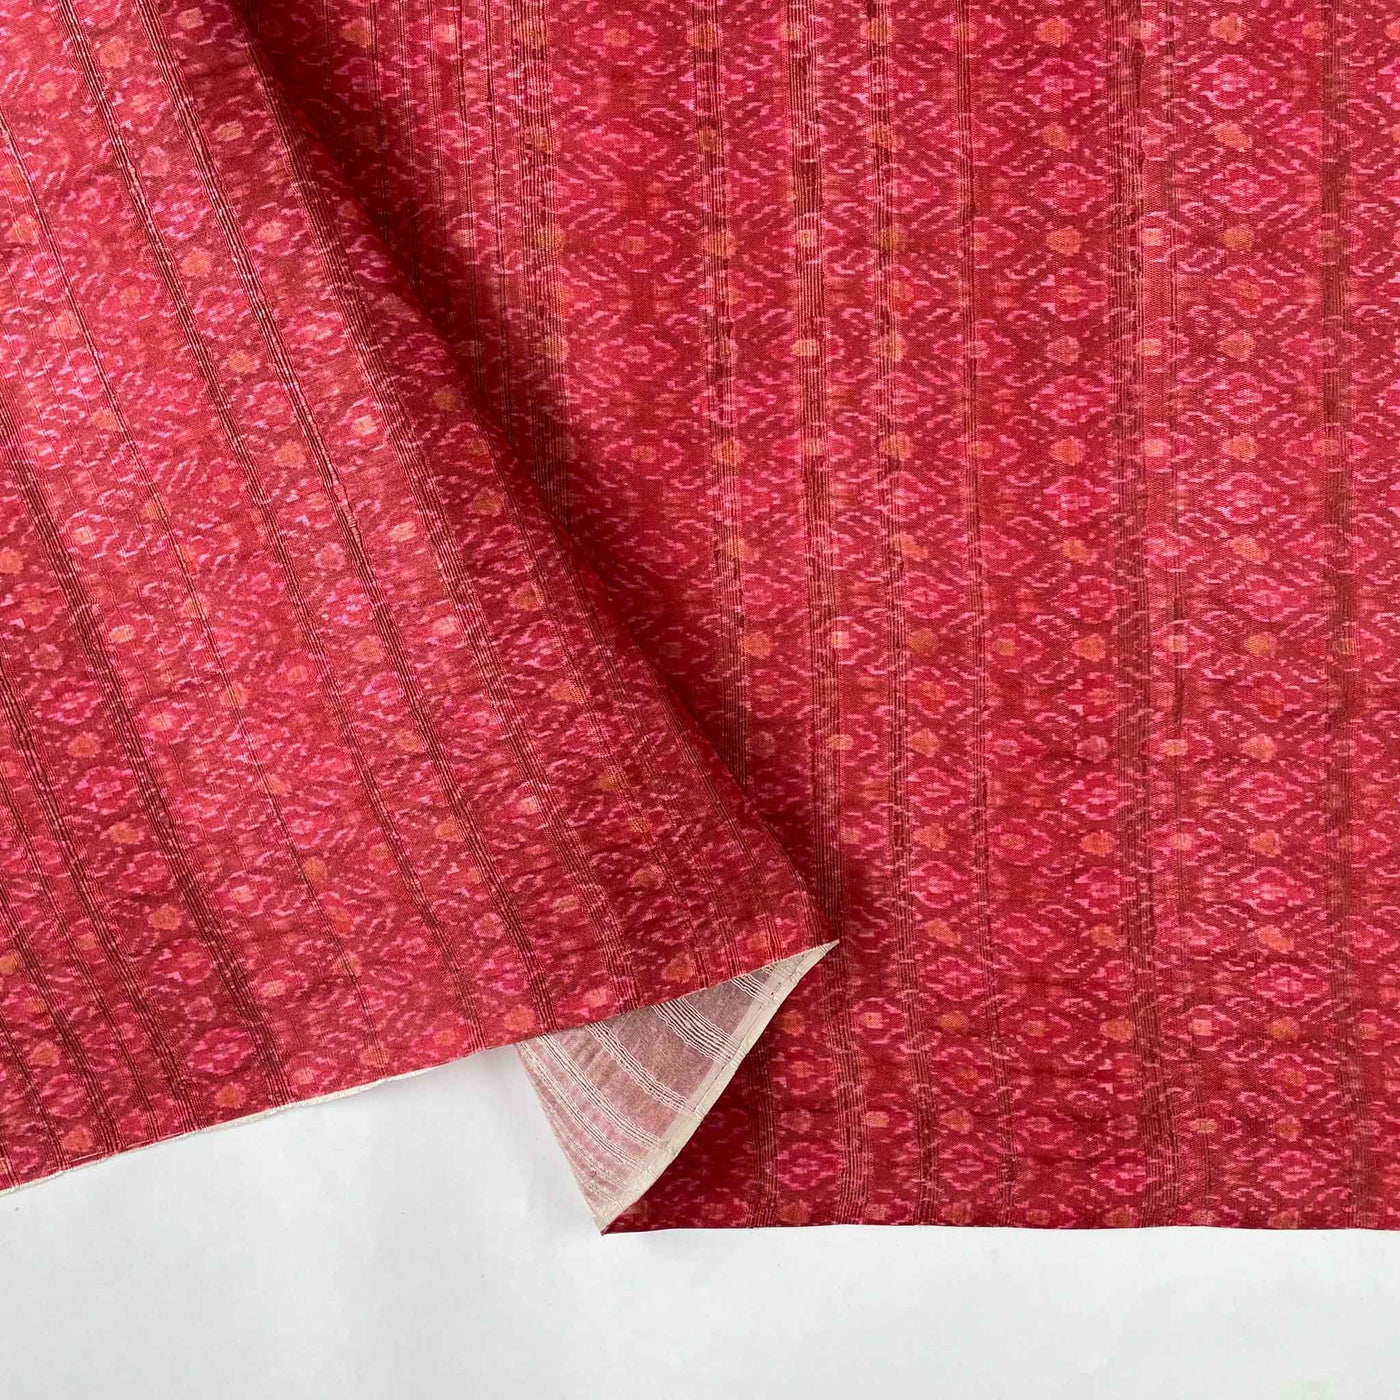 Fabric Pandit Fabric Peach Red Vintage Texture Digital Printed Tussar Silk Fabric (Width 44 Inches)